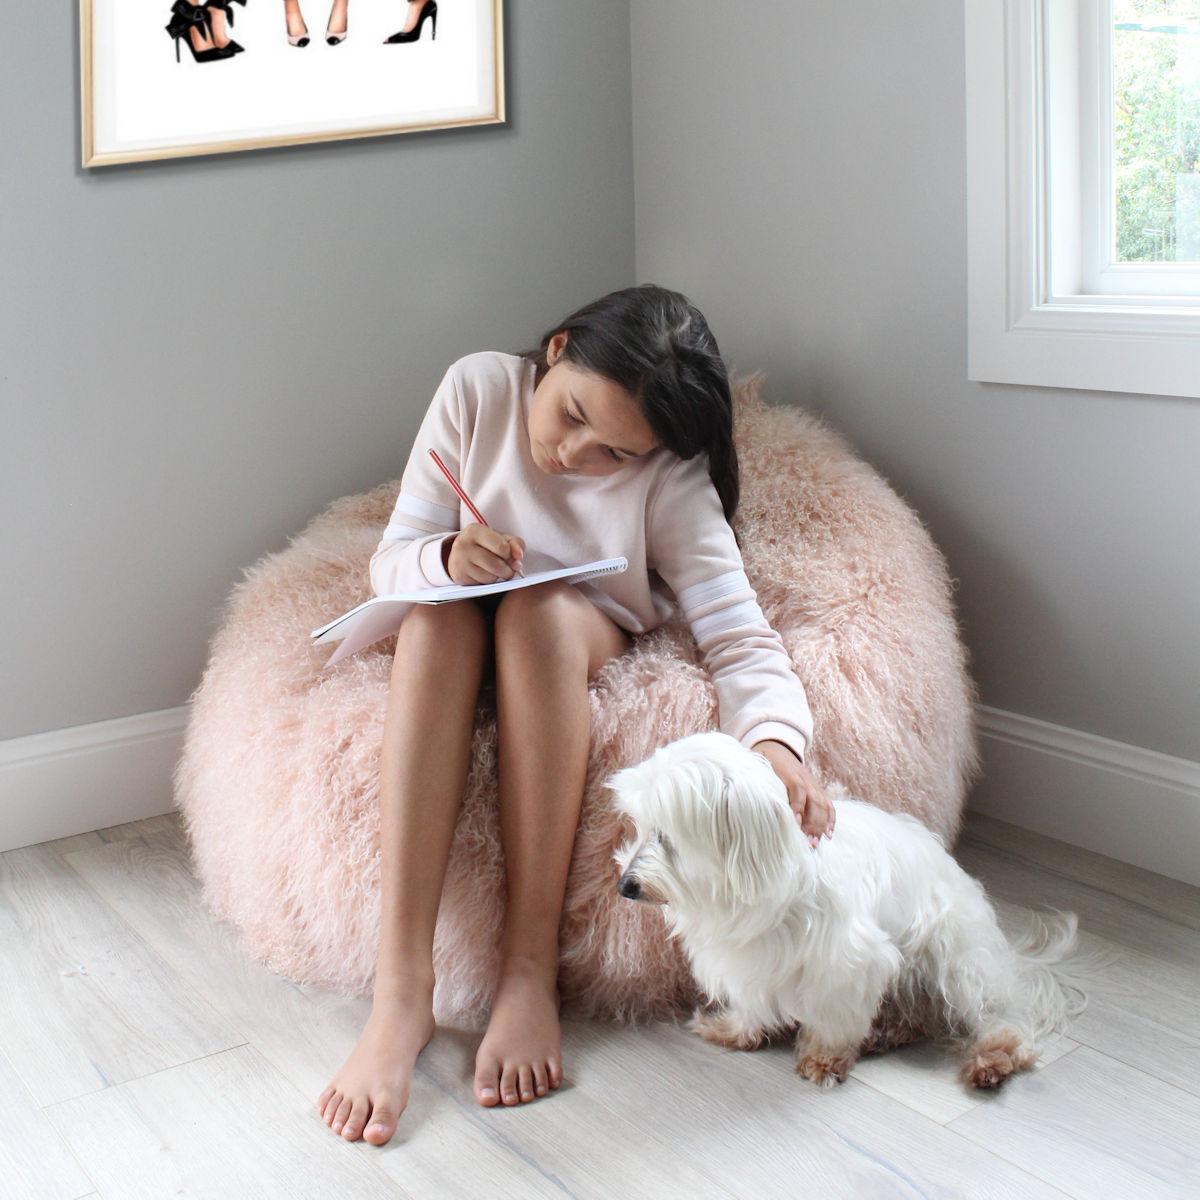 After a long day what better way for your little princess to relax in the oozing comfort in this delightful pink fur bean bag chair? 

Created by designer Australian designer, Emily Barbara and intricately handcrafted in Australia using the finest